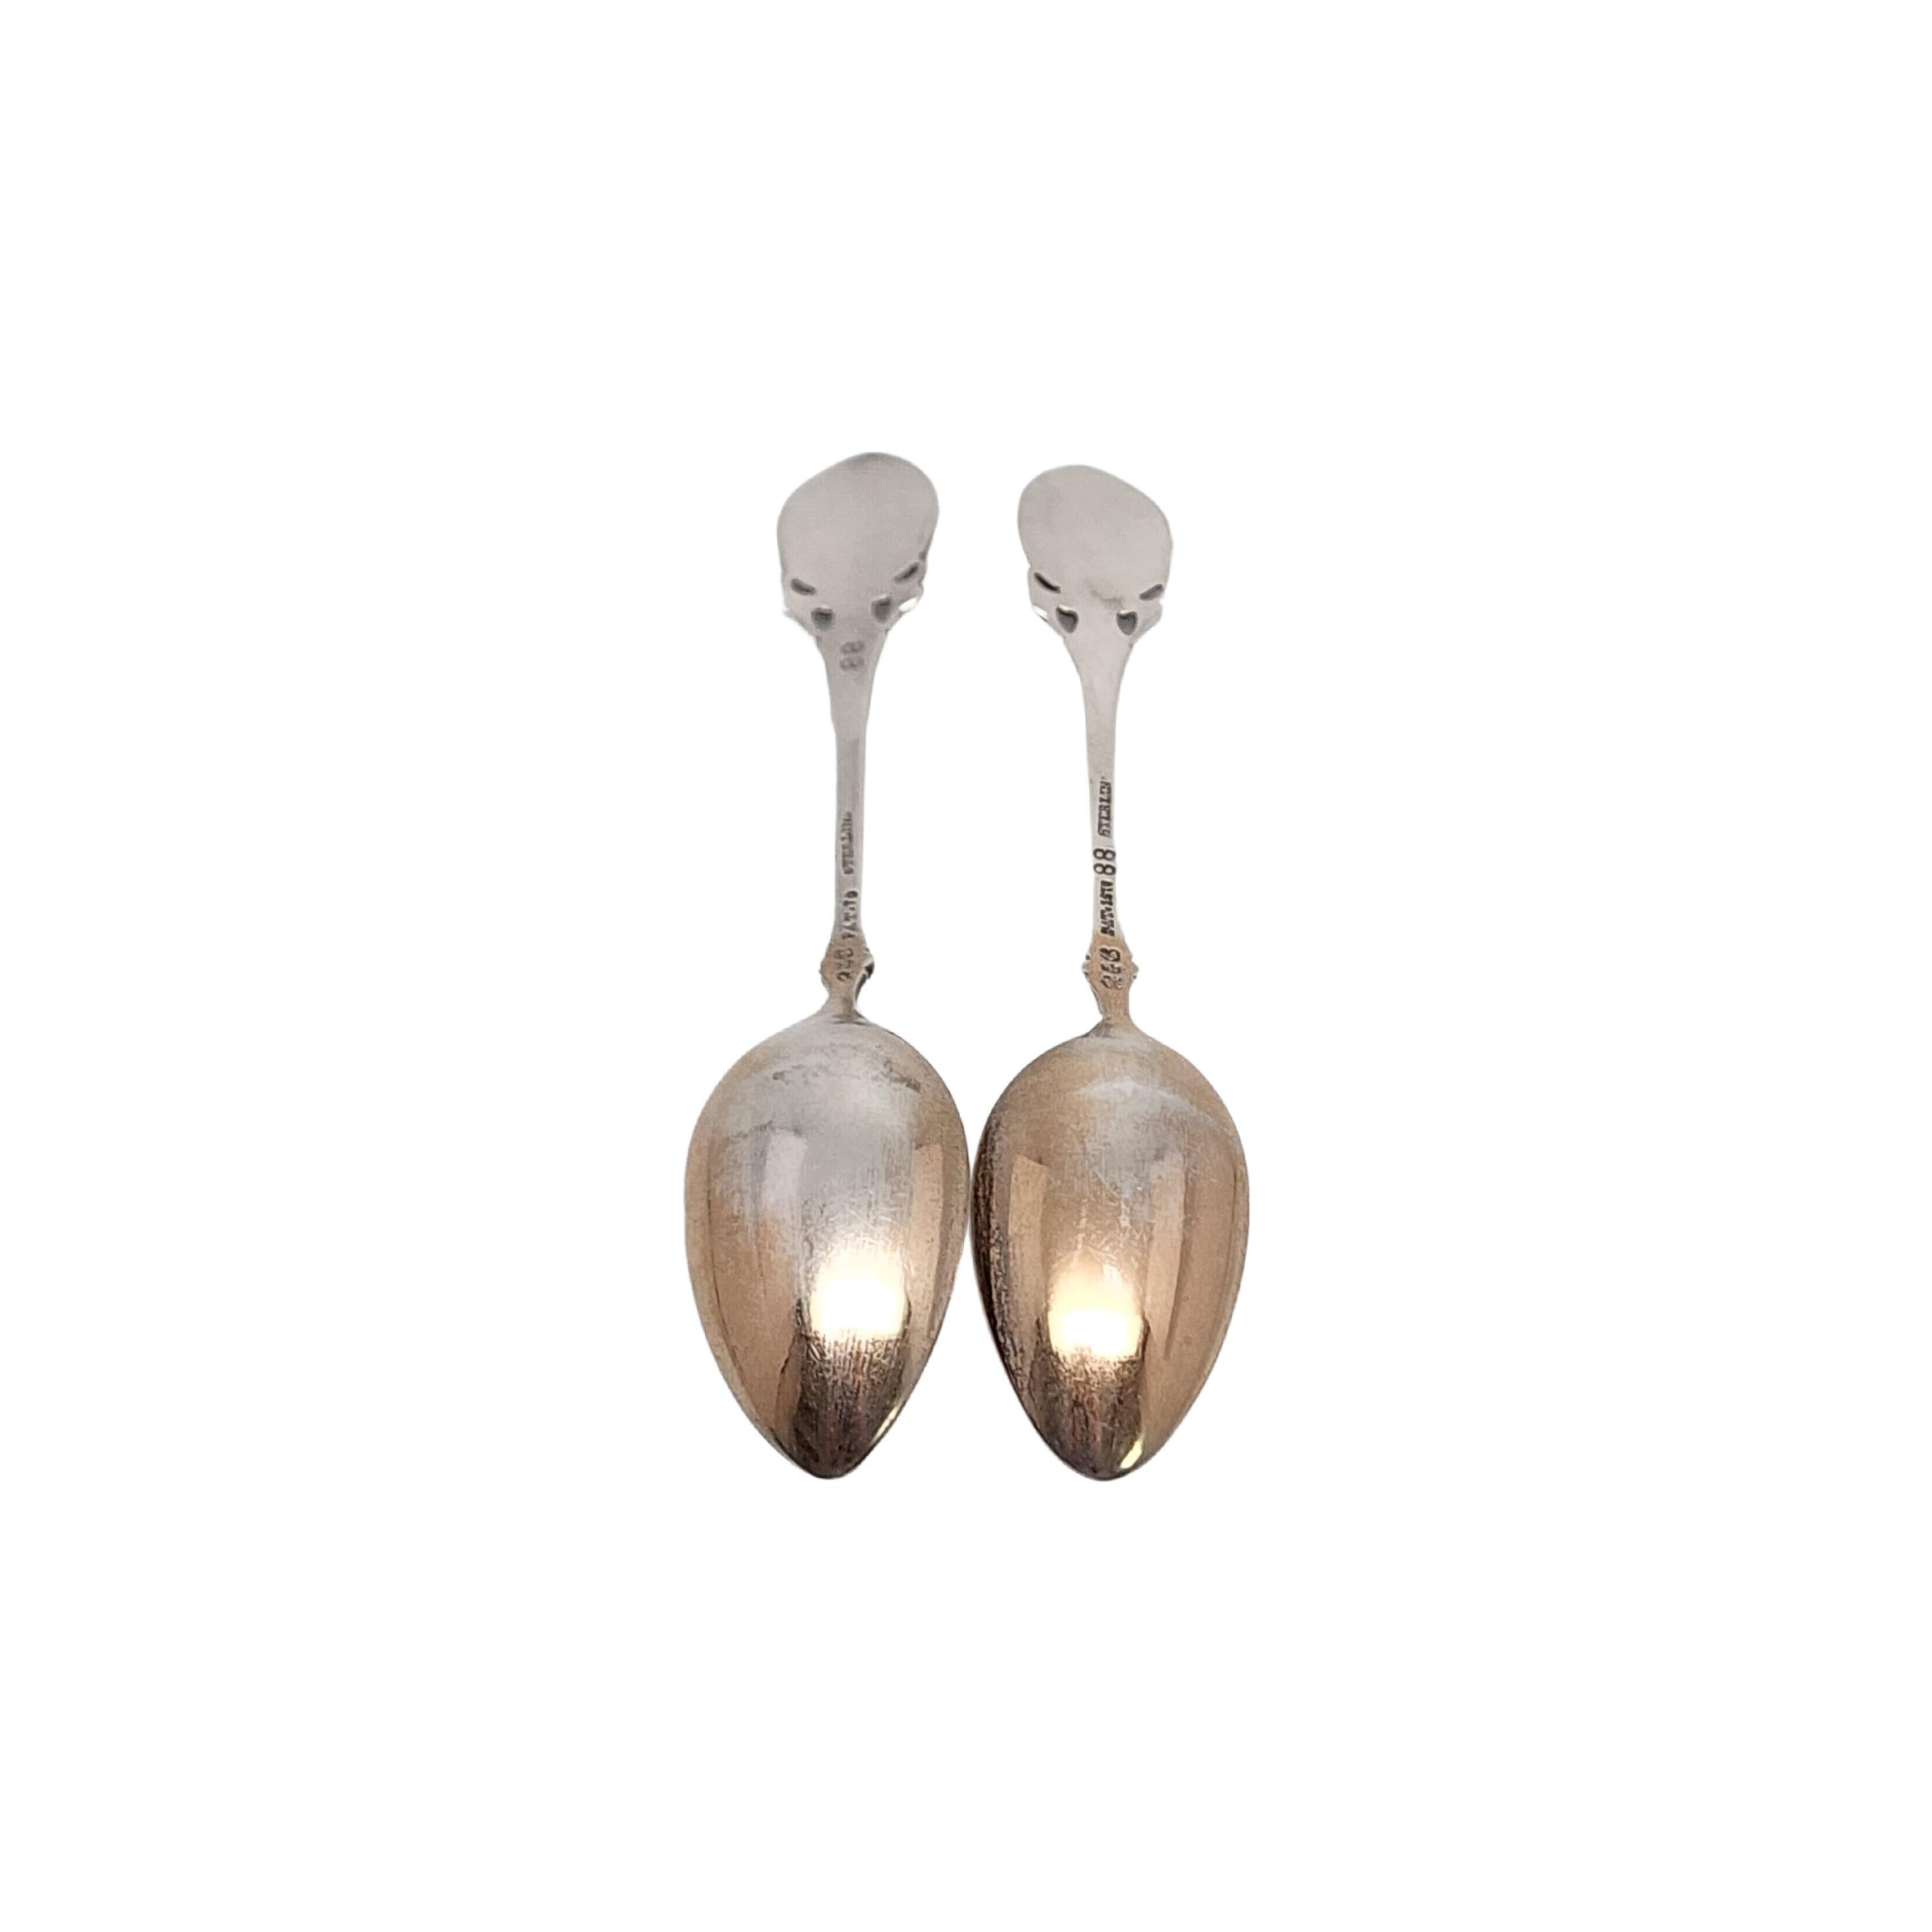 Set of 2 antique sterling silver demitasse spoons by Gorham in the Lily 1870 pattern.

No monogram

Gorham's Lily pattern was designed by George Wilkinson, these small spoons feature a gold wash bowl.

Measures approx 4 1/8